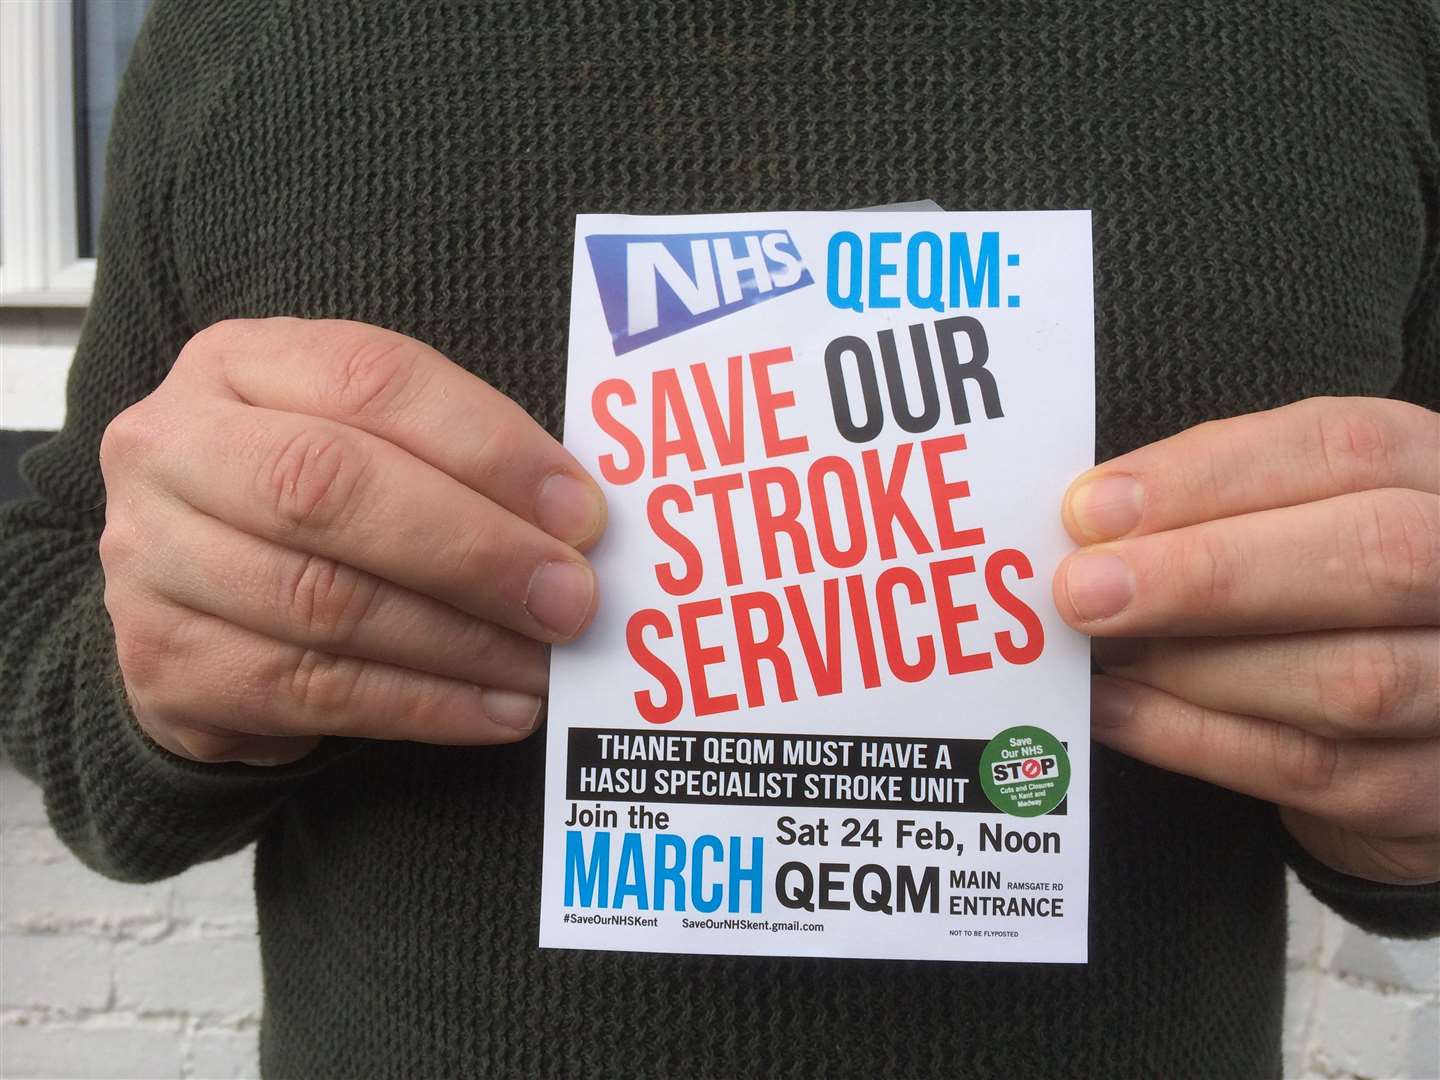 A SONIK Save Our Stroke services flyer